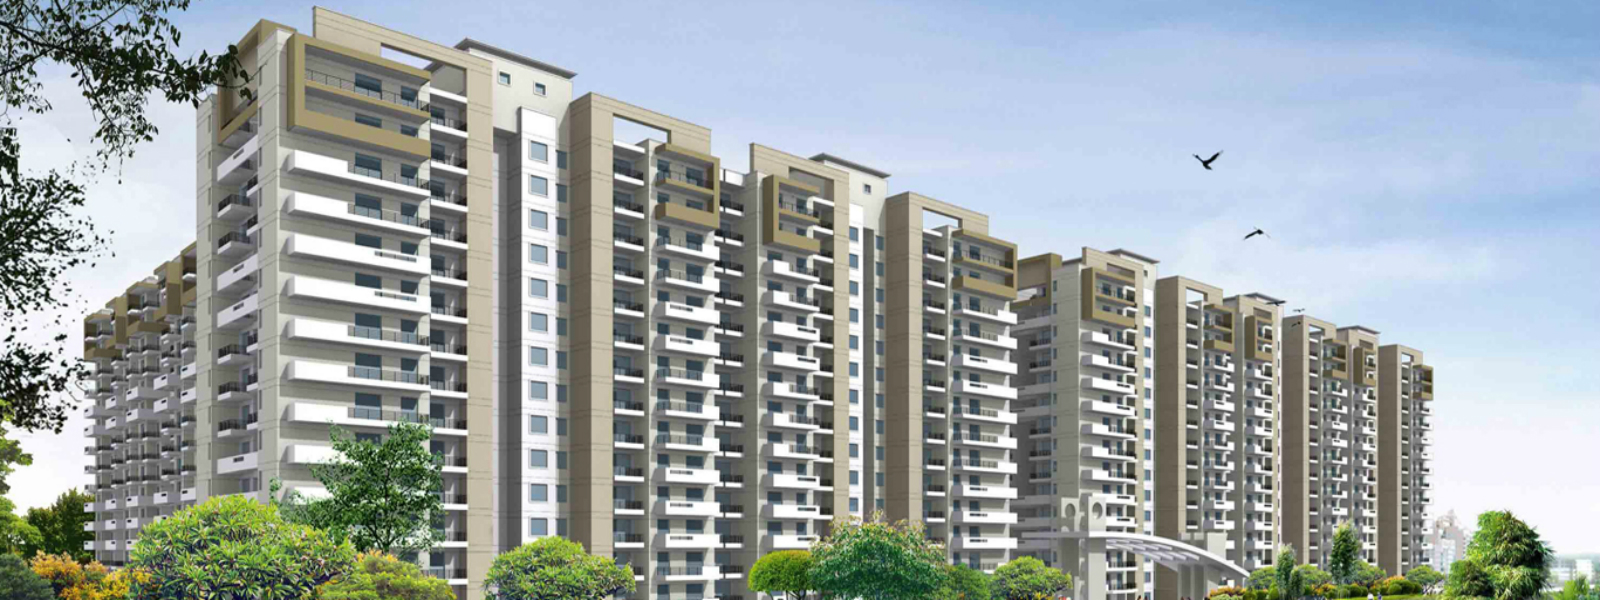 Affordable Housing in Gurgaon